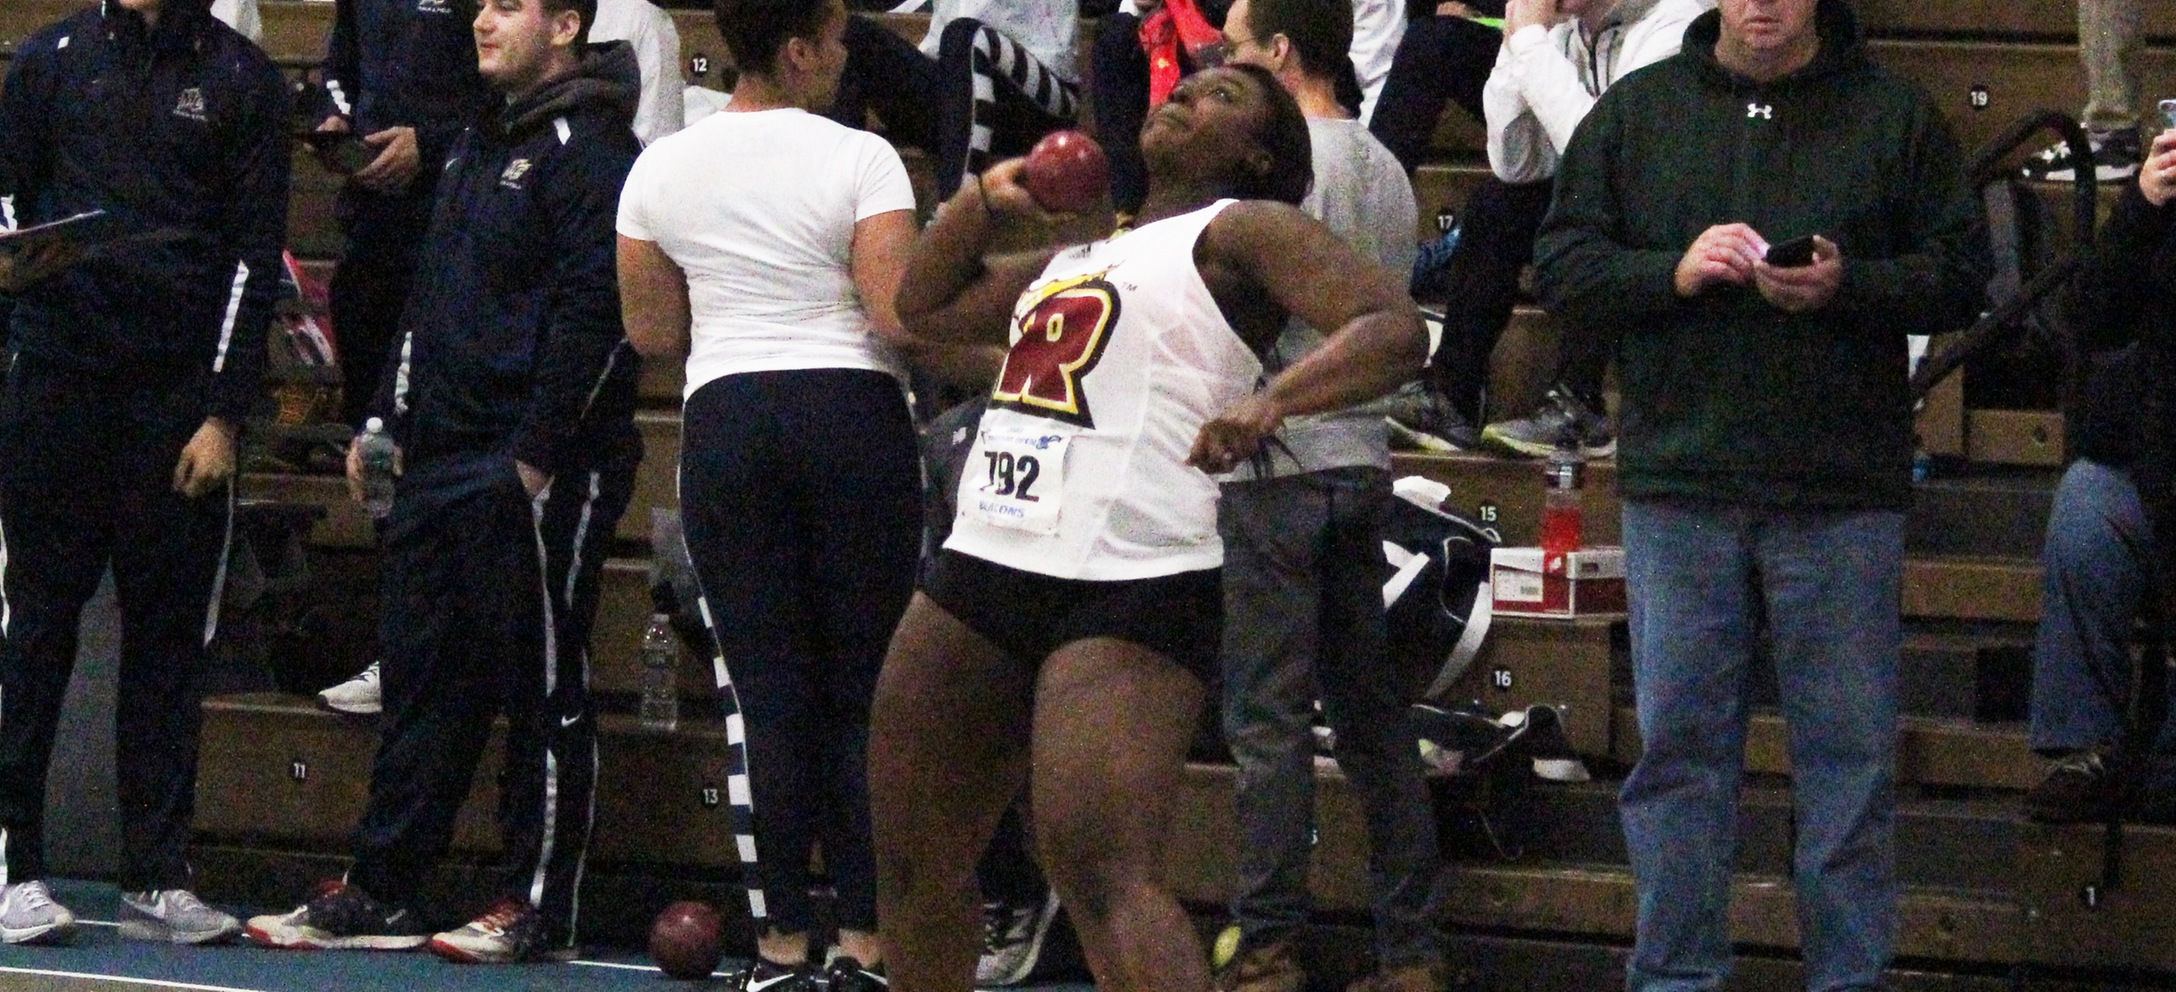 Akanegbu Delivers A Pair Of Top 20 Throws At New England Championships